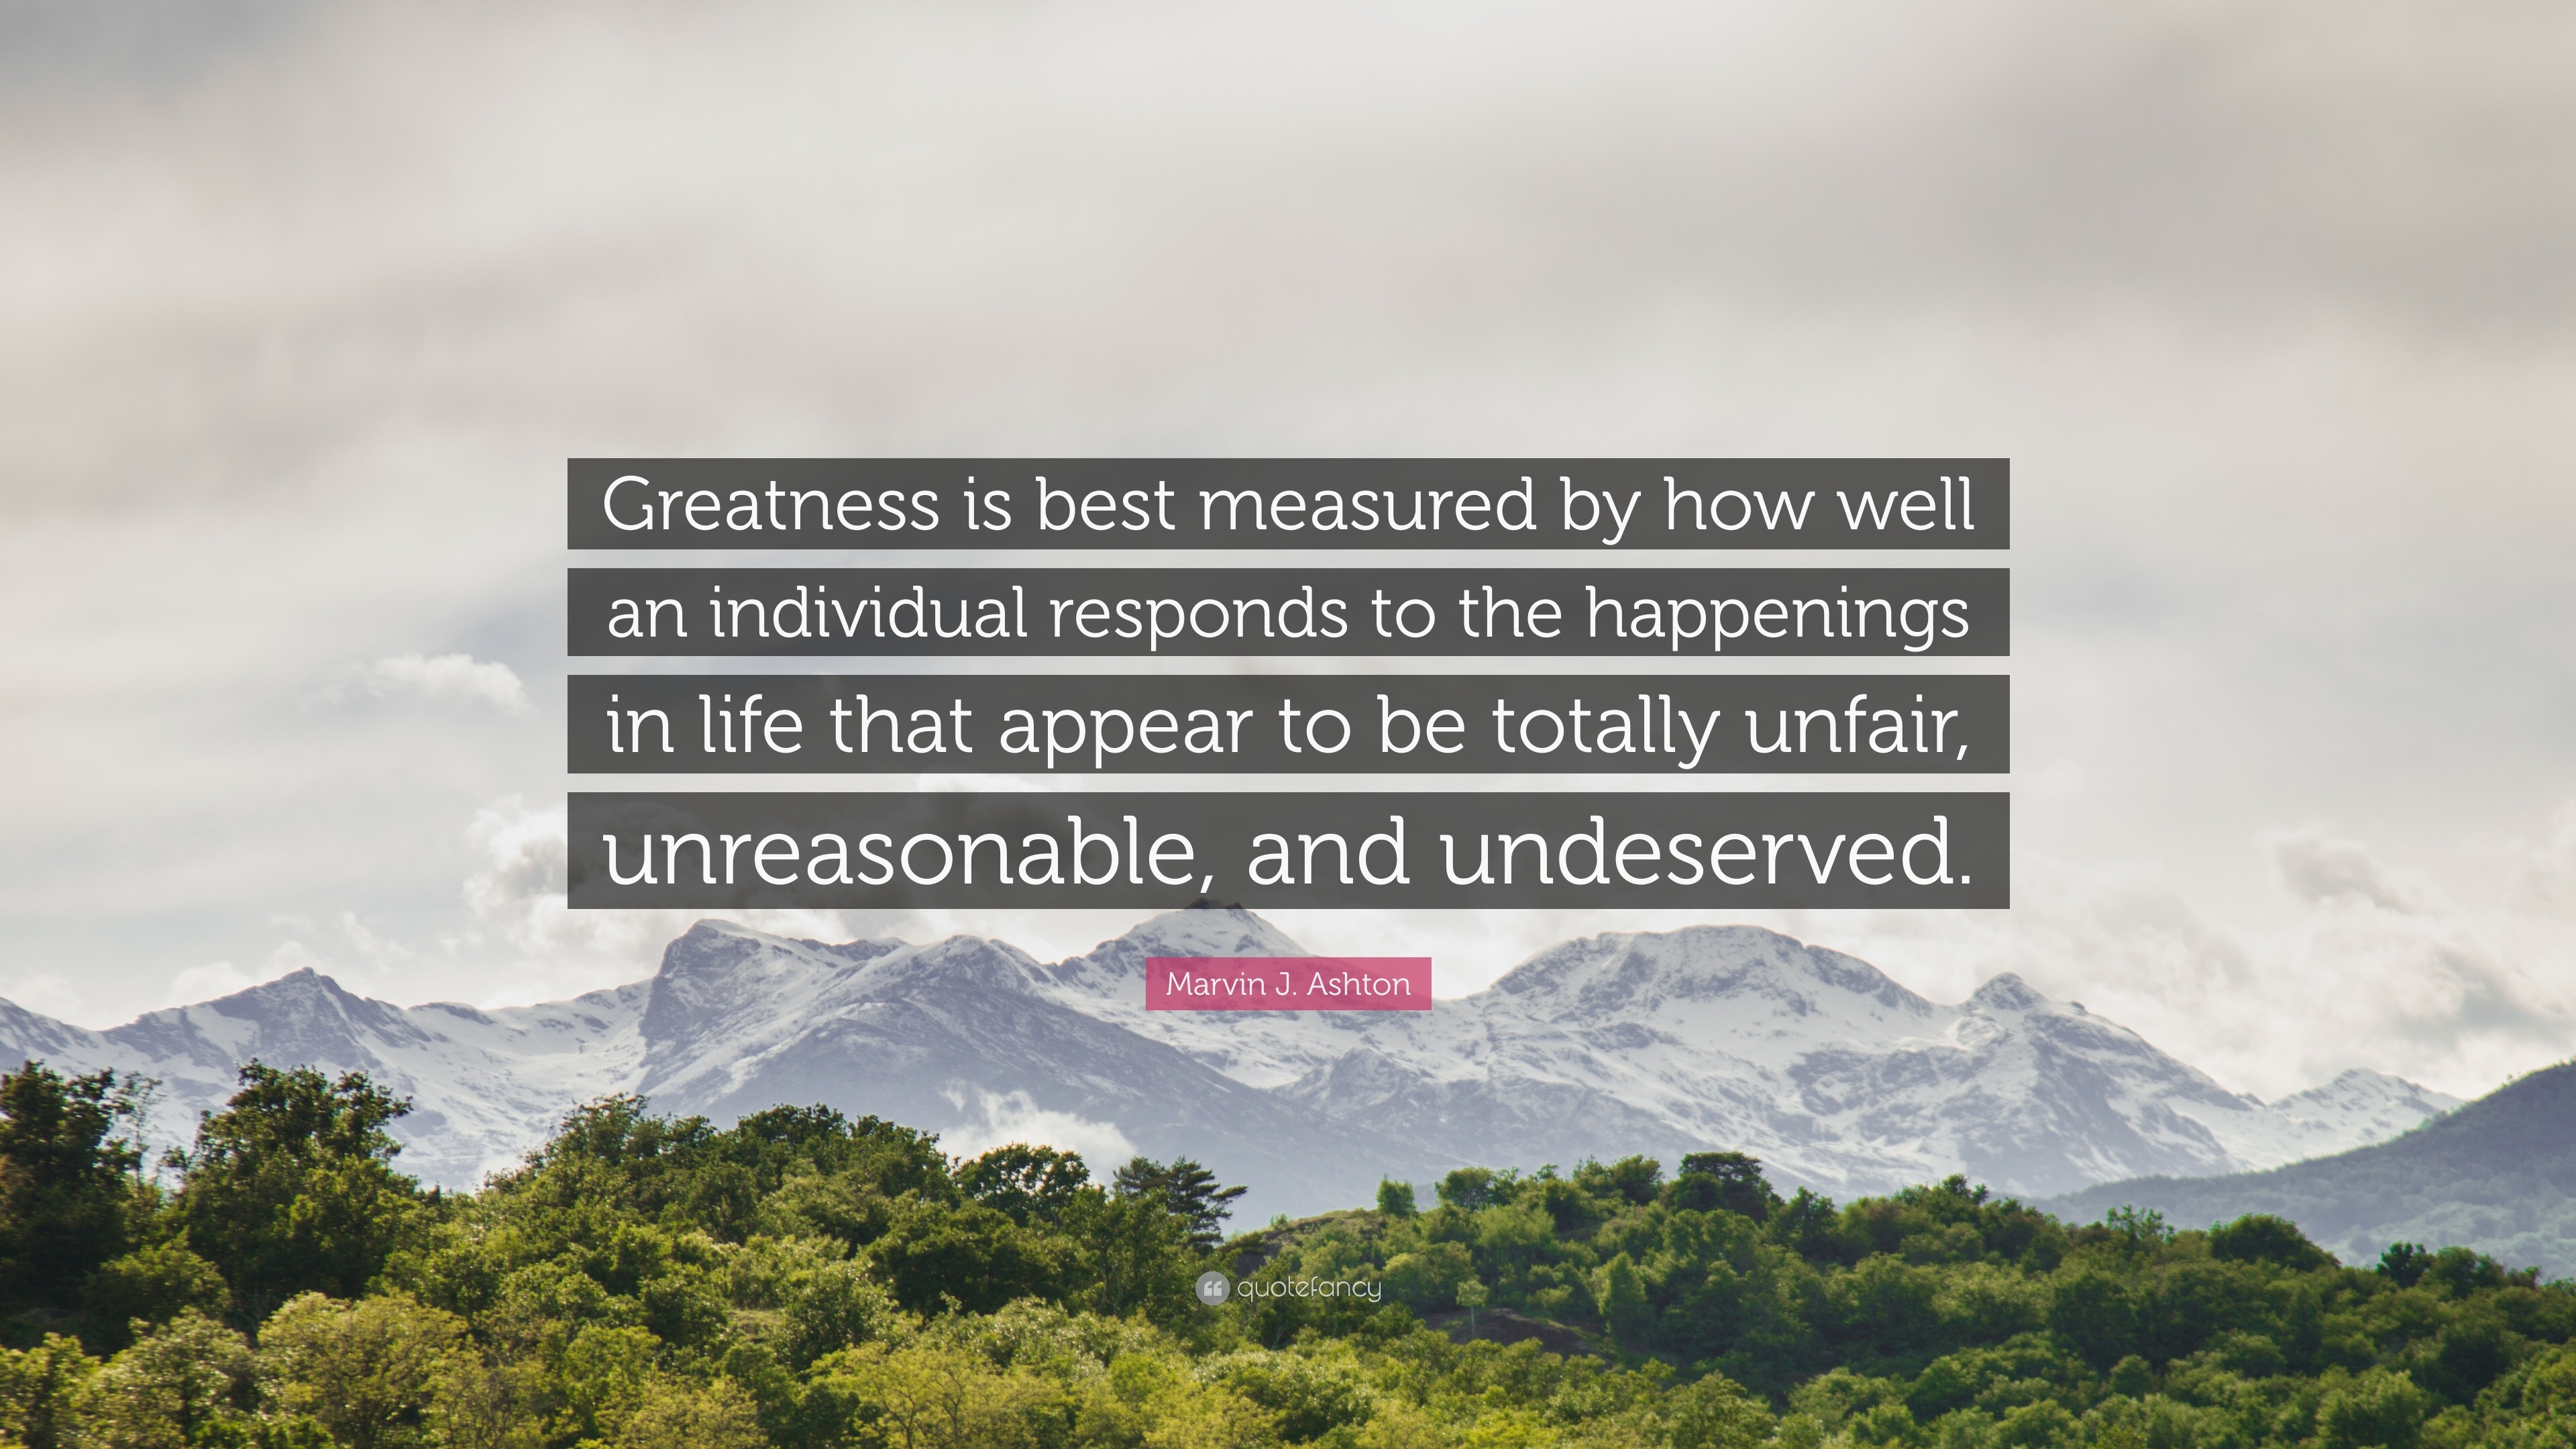 Marvin J Ashton Quote “Greatness is best measured by how well an individual